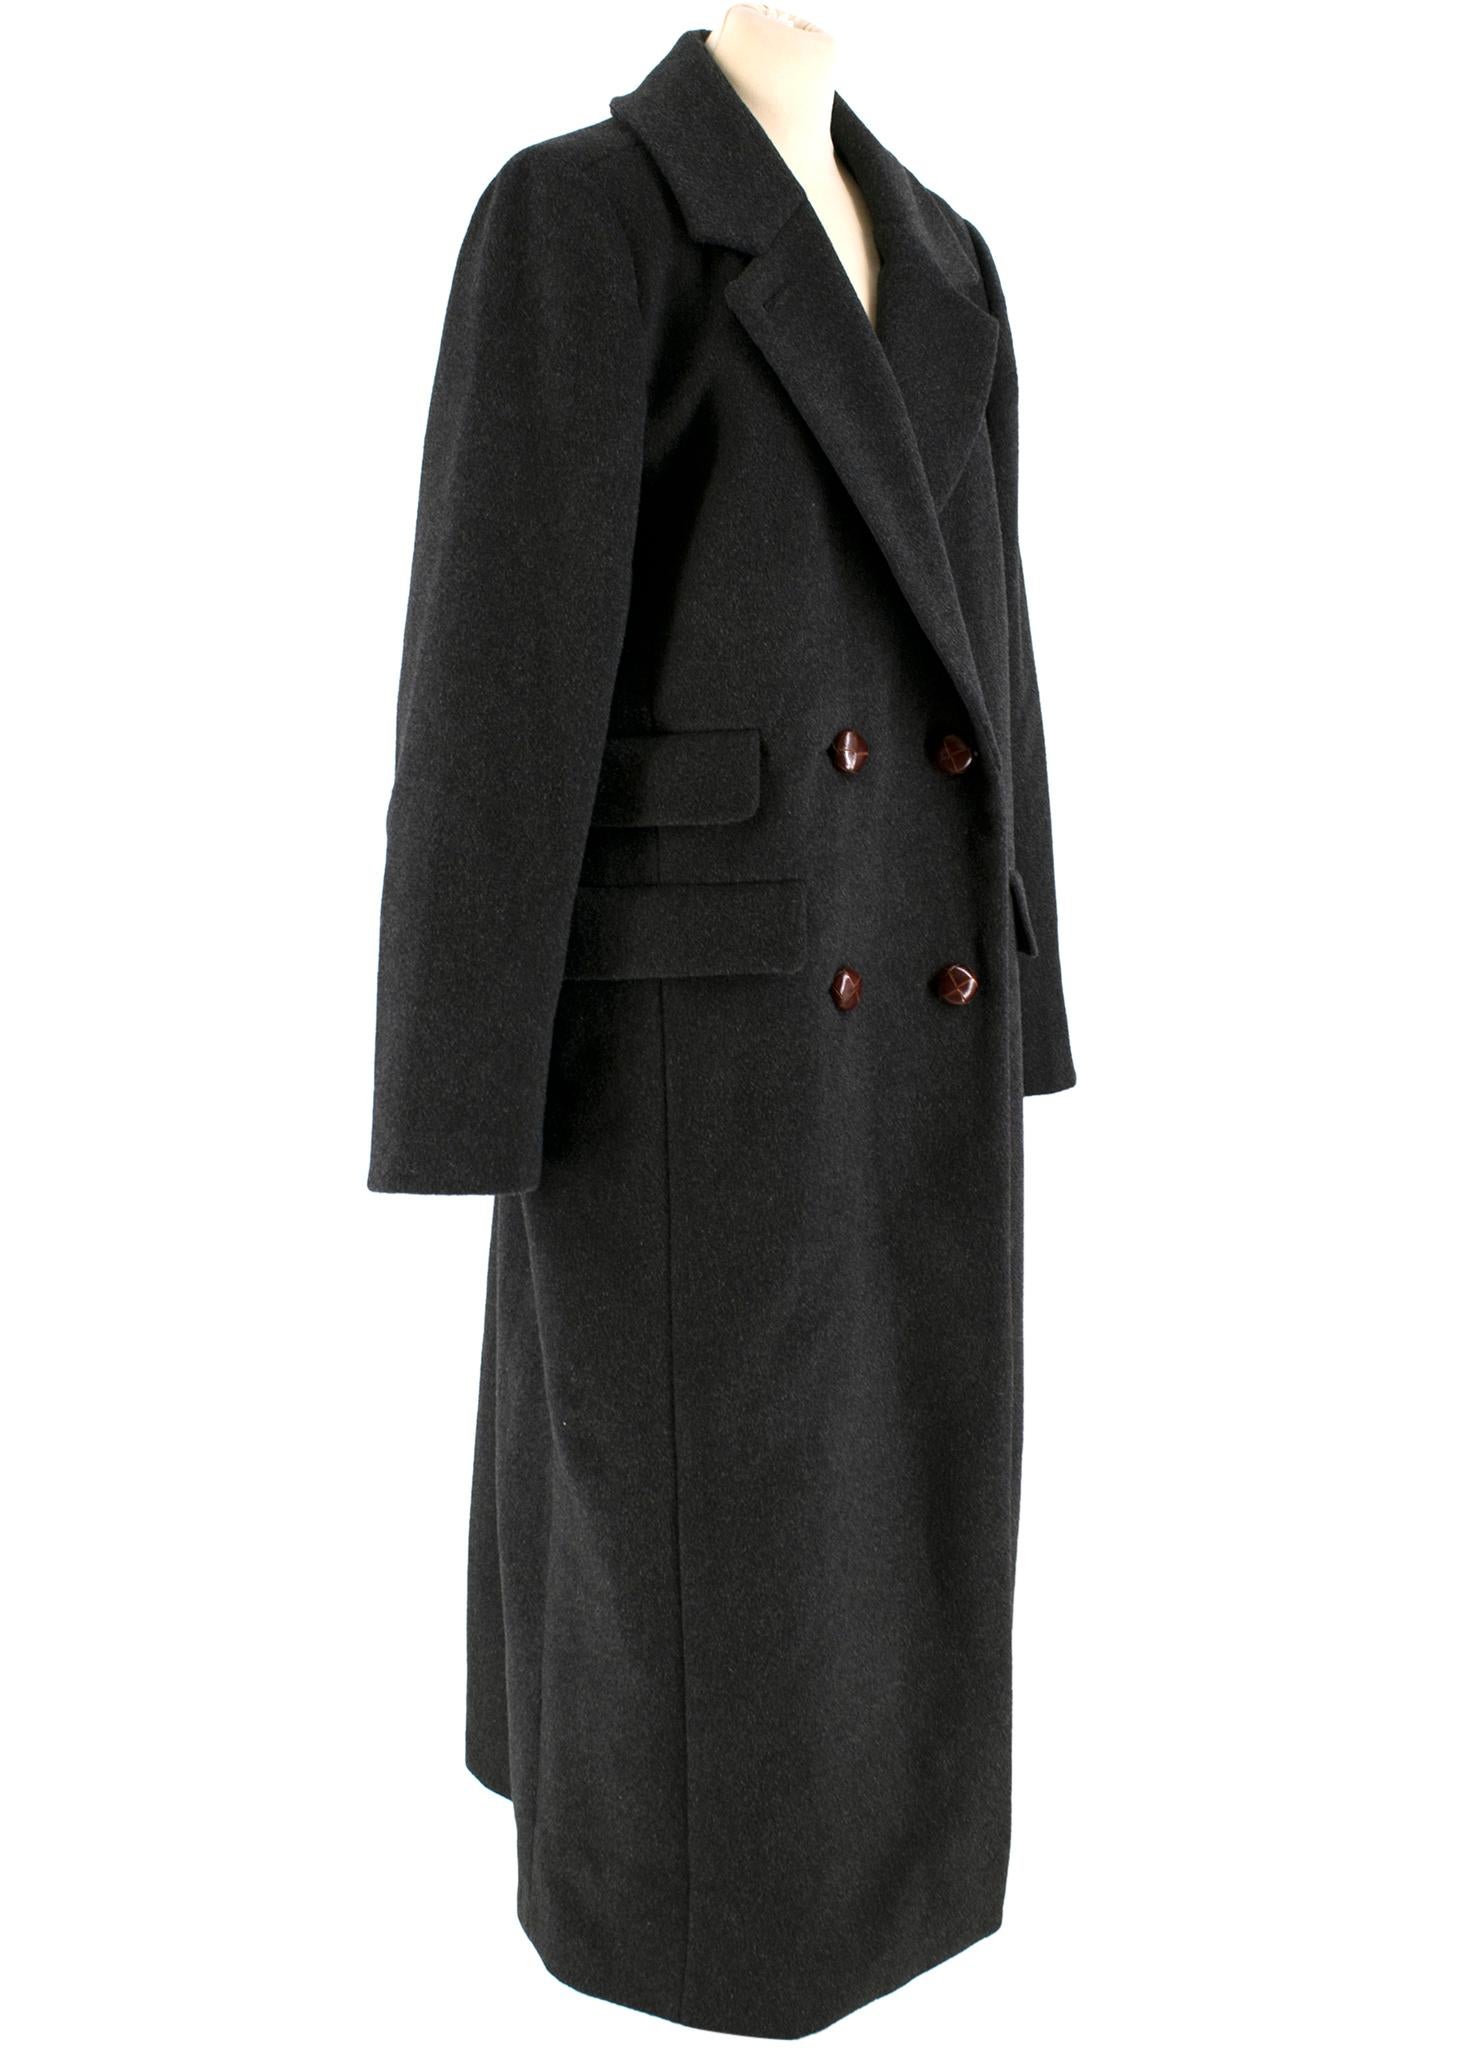 Ganni Dark-Grey Double-Breasted Long Wool Coat 

- Dark-Grey, wool long coat
- Double-breasted closure
- Woven-effect leather buttons
- Long sleeves
- Decorative flap buttons 
- Back vent

Please note, these items are pre-owned and may show some